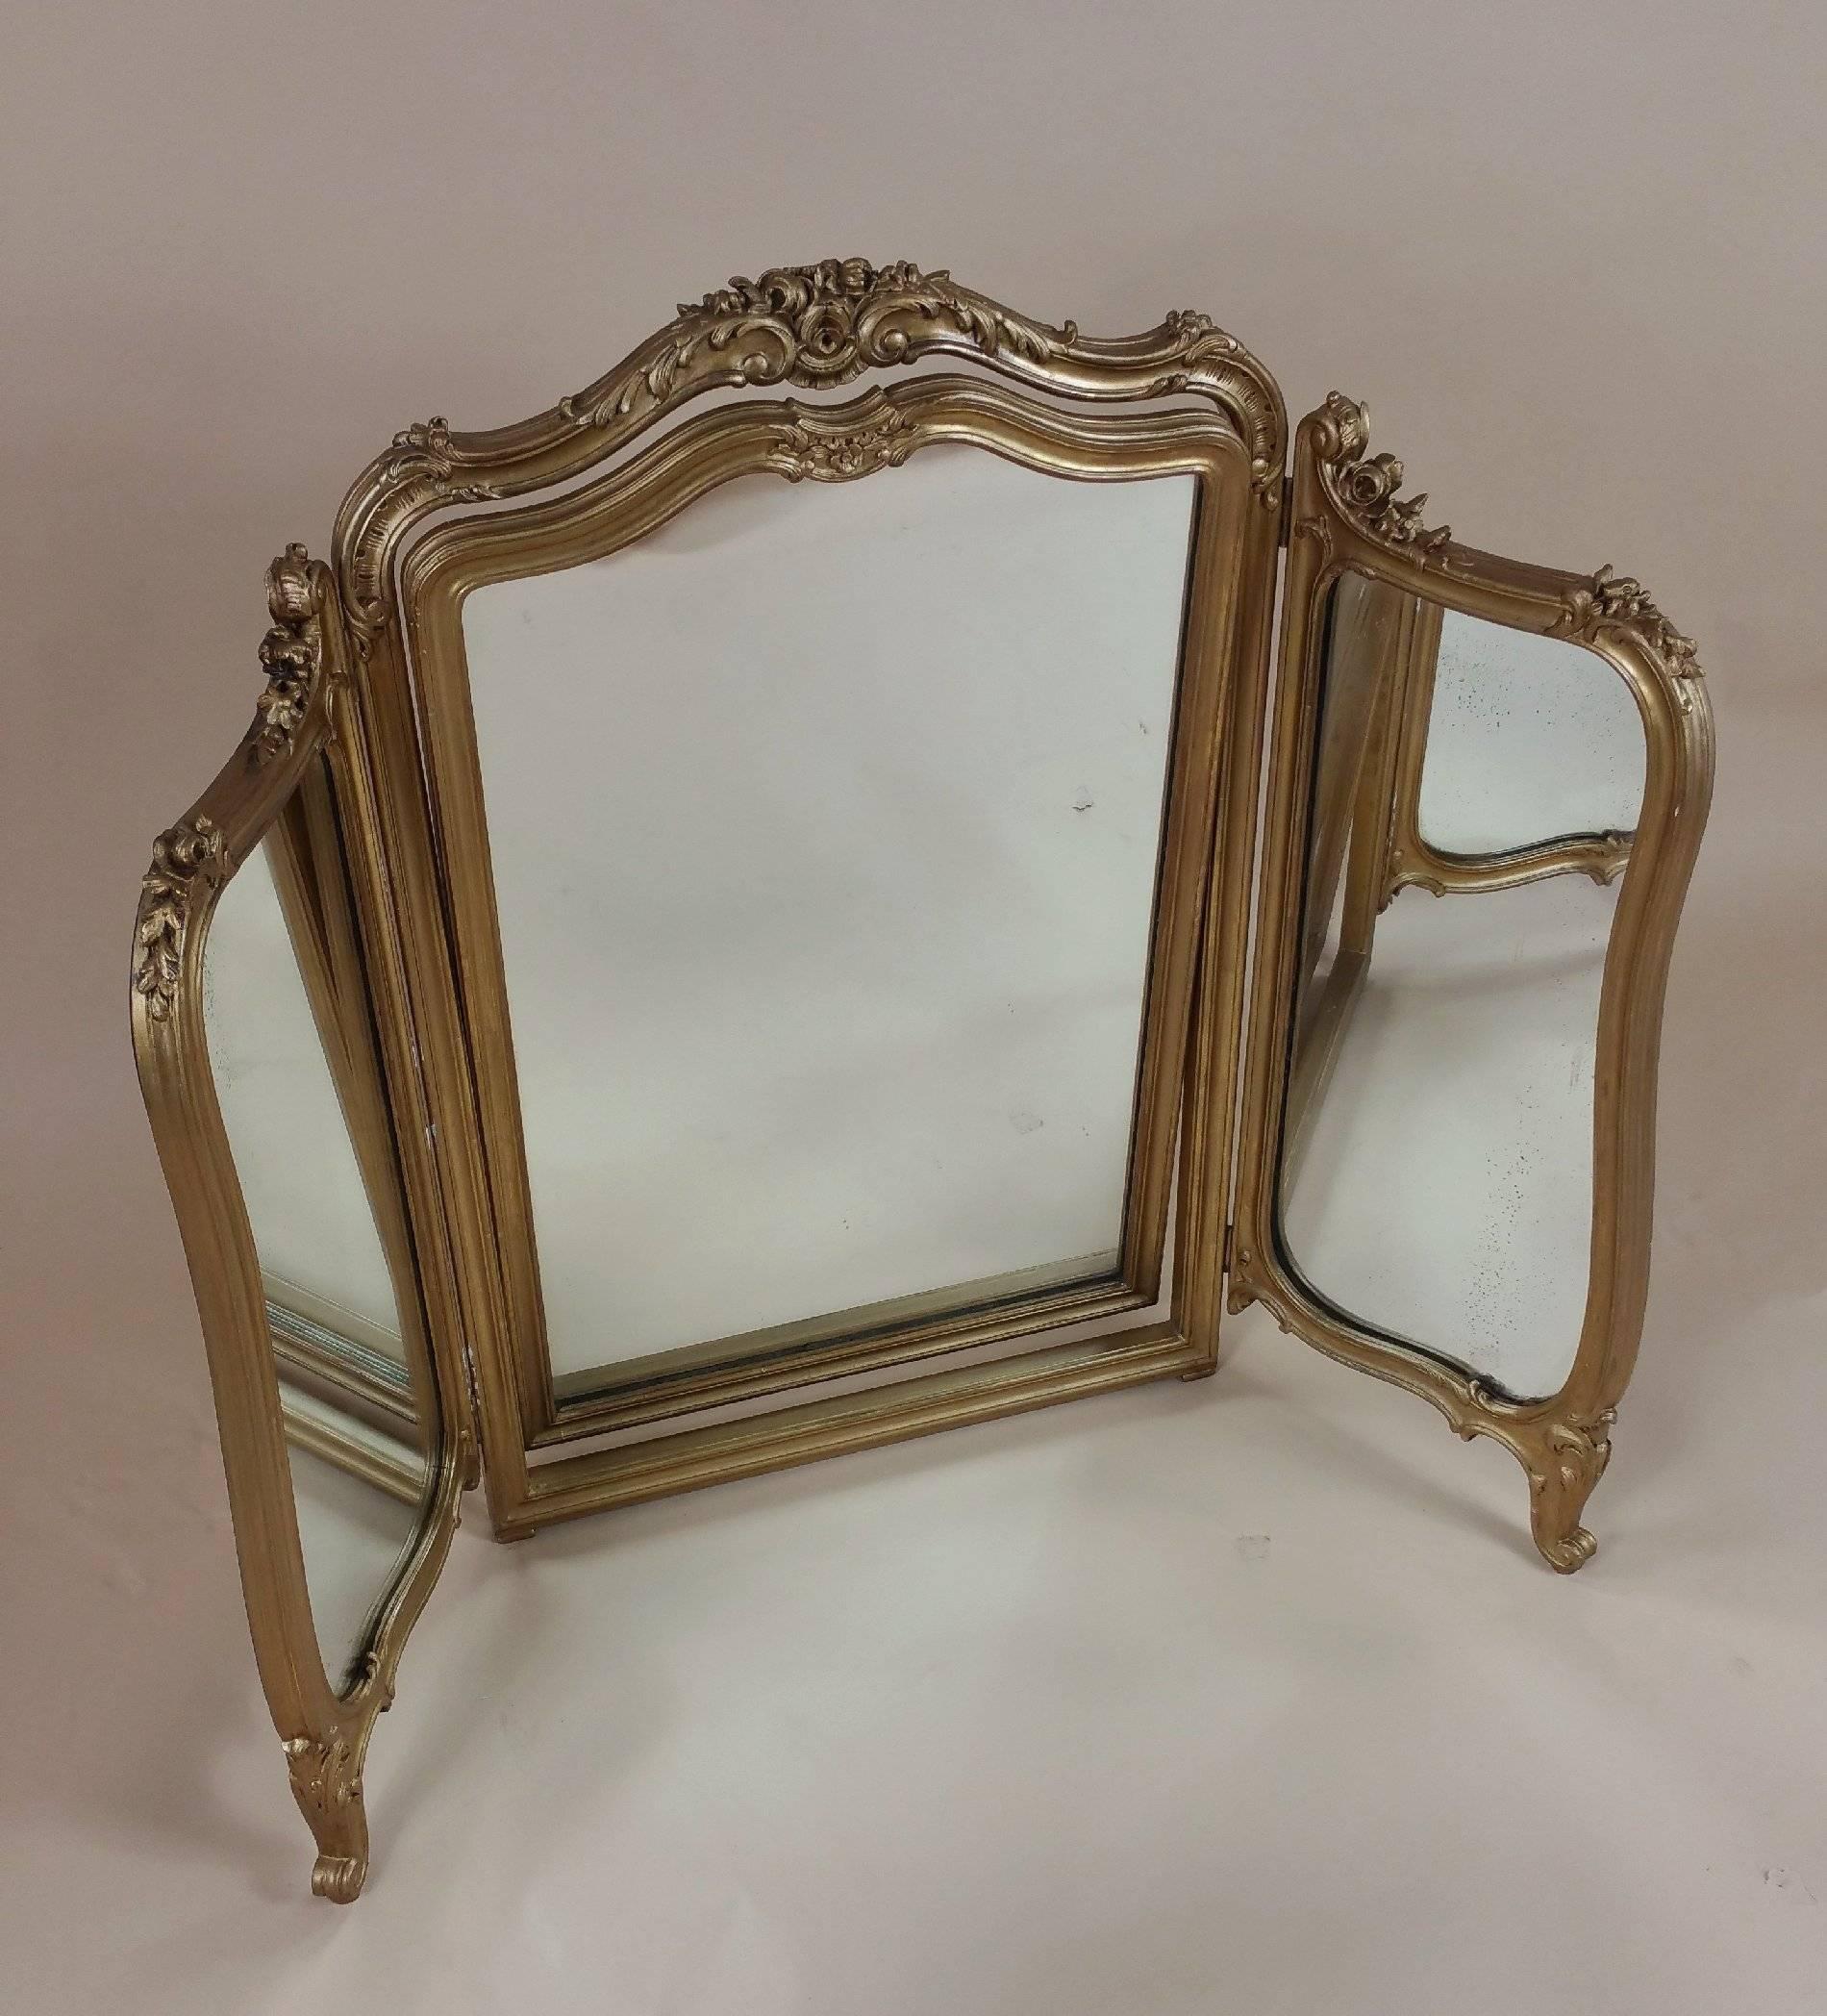 This beautiful and sizable 19th century carved giltwood triptych mirror will fold together completely, in addition to the fully tilting central mirror. The English piece features a lovely serpentine shaped top and is supported on curled acanthus